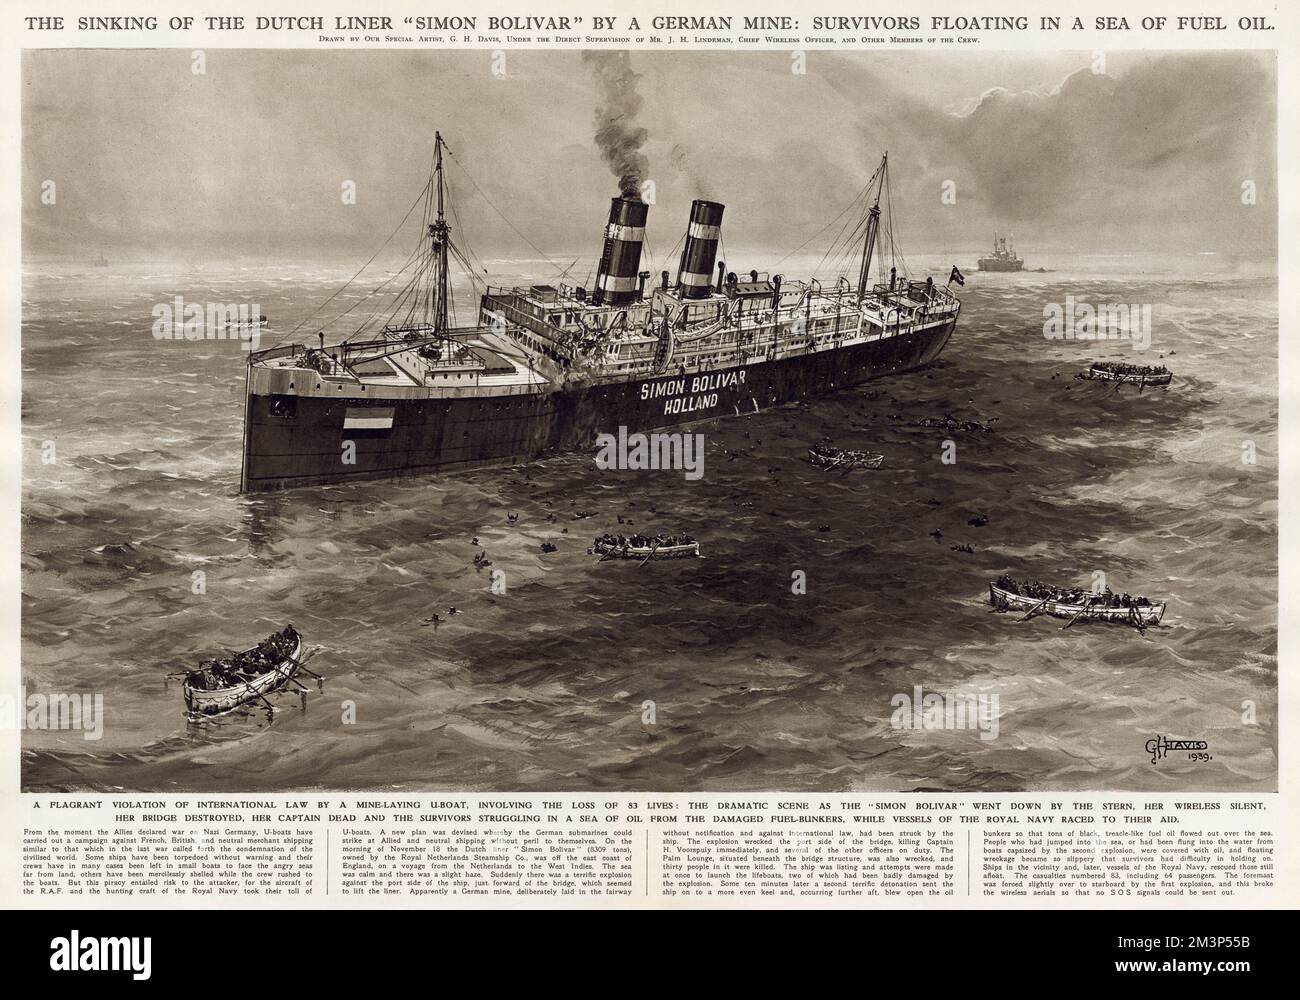 The sinking of the Dutch liner, Simon Bolivar, by a German mine: survivors floating in a sea of fuel oil.  A flagrant violation of international law by a mine-laying U-boat, involving the loss of 83 lives.  The dramatic scene as the ship went down by the stern, her wireless silent, her bridge destroyed, her captain dead and the survivors struggling in a sea of oil from the damaged fuel bunkers, while vessels of the Royal Navy raced to their aid.      Date: 18 November 1939 Stock Photo